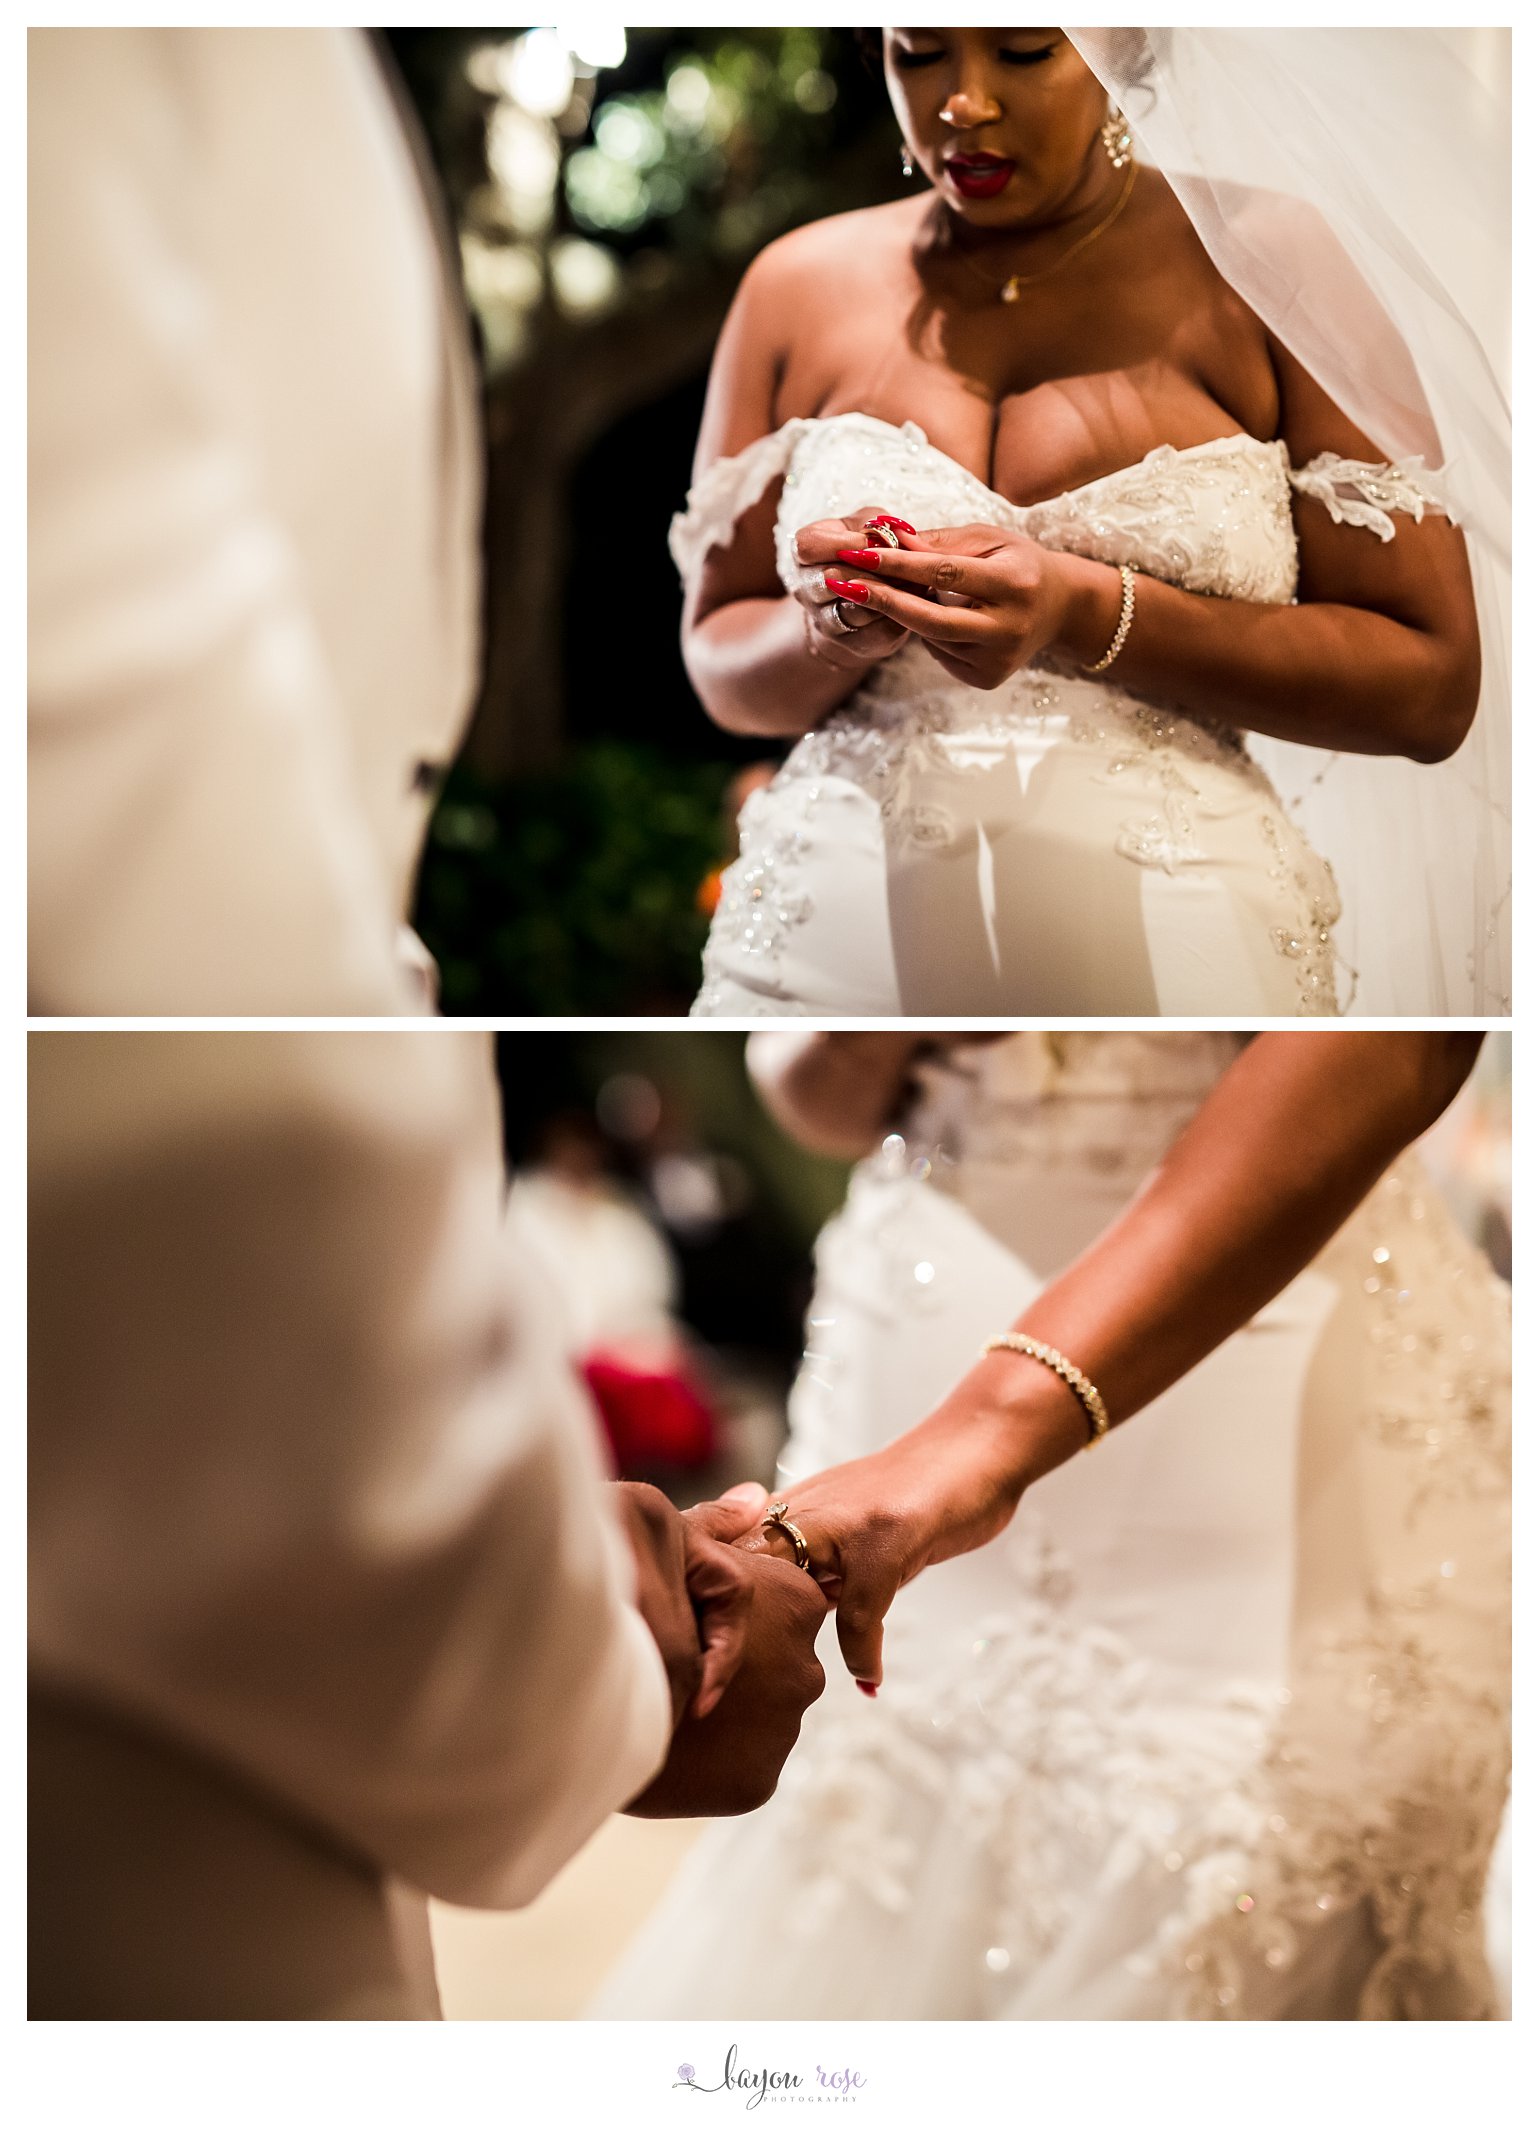 ring exchange during ceremony at Southern Oaks New Orleans